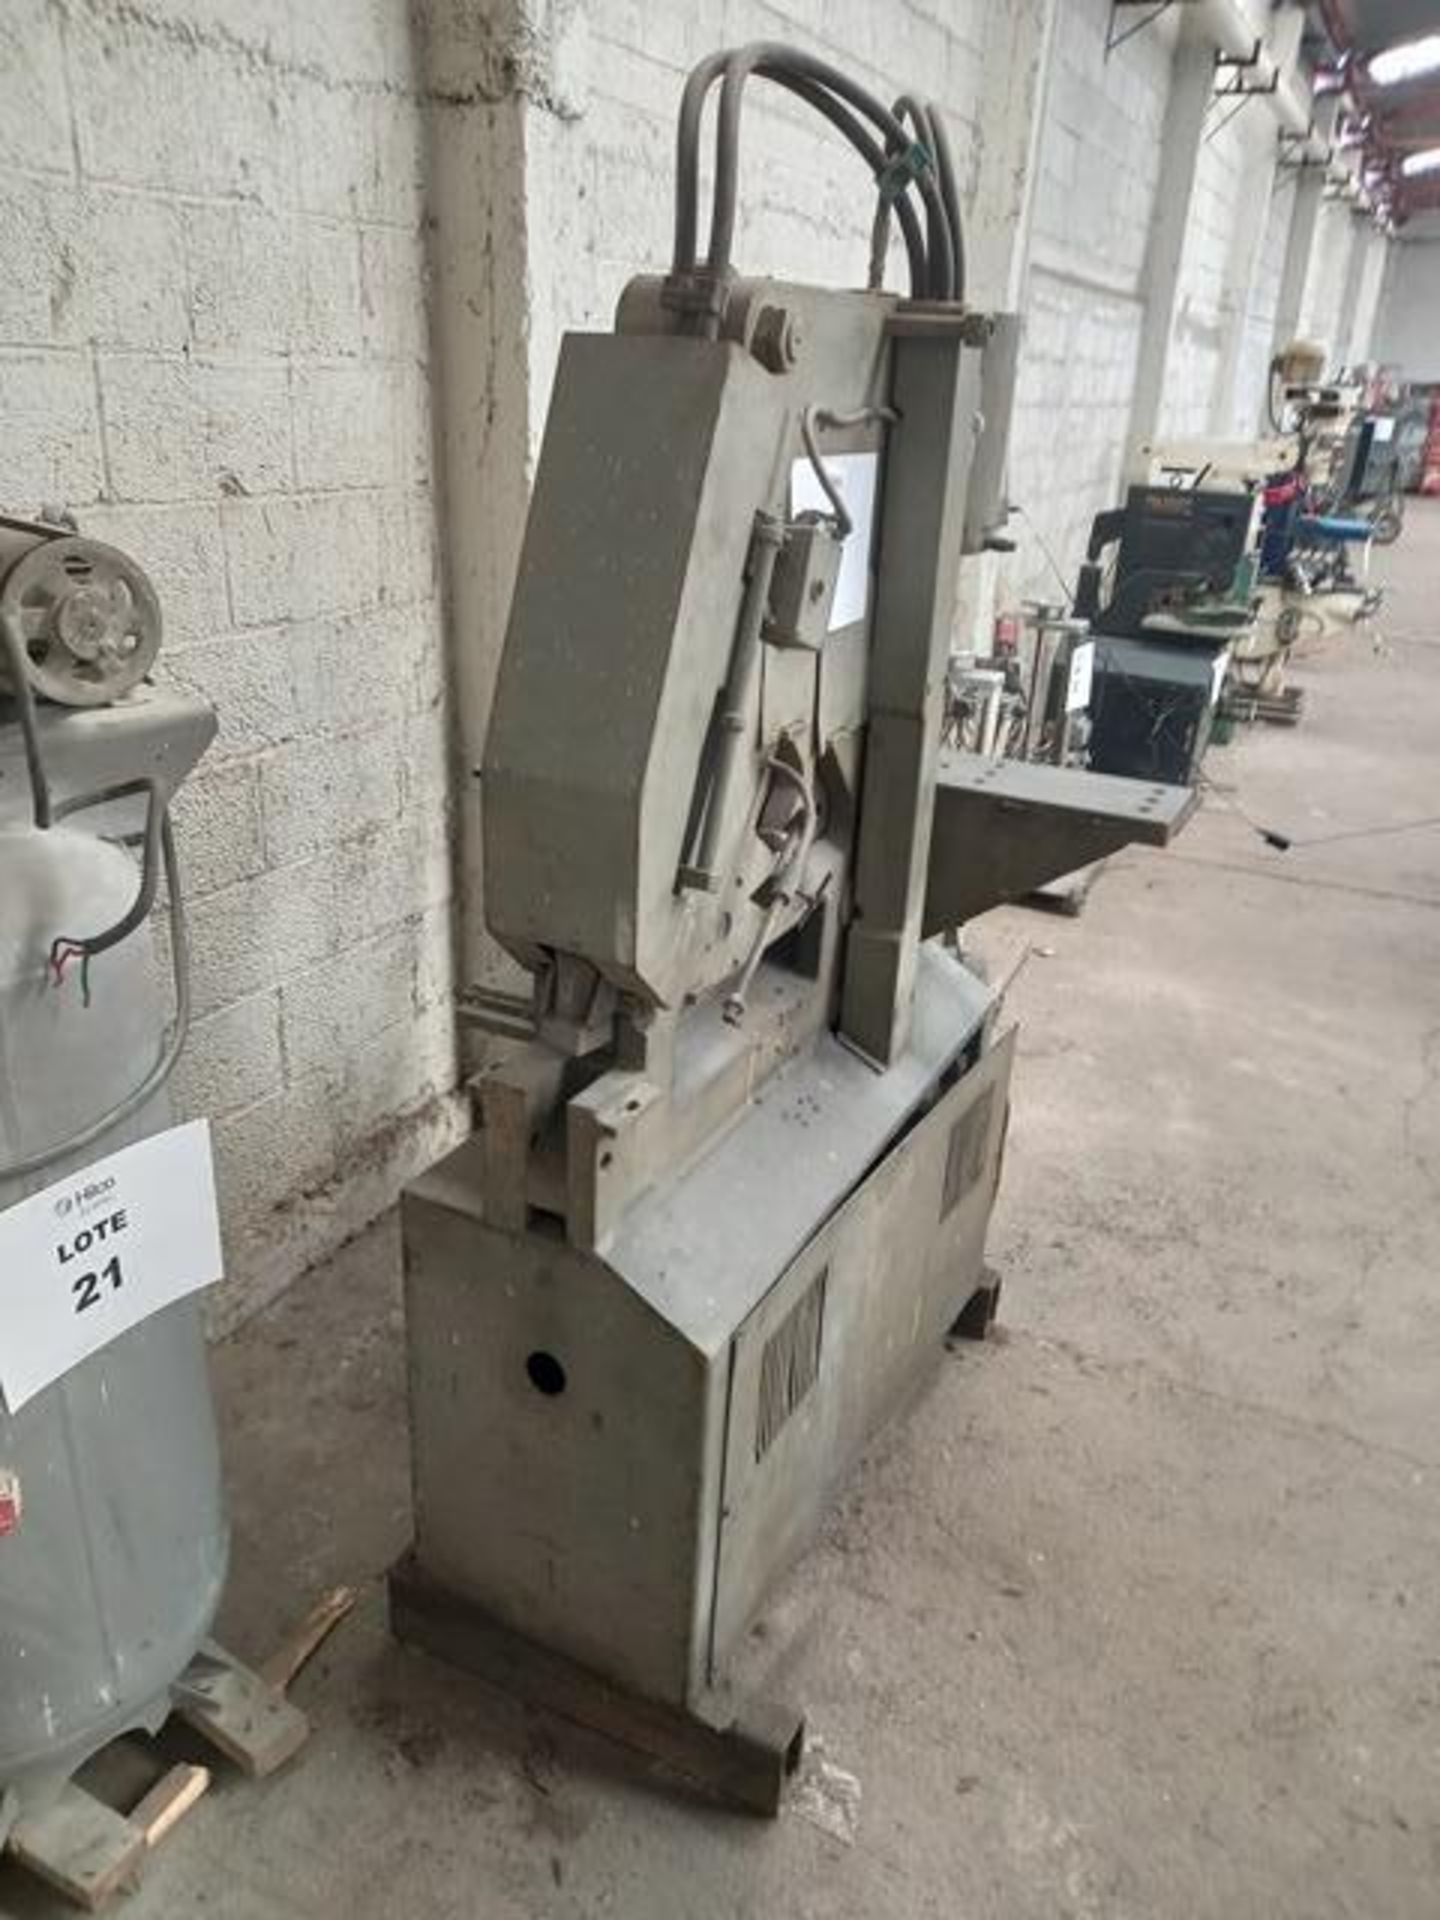 Mubea HIW 1000 Punching Machine, S/N: Illegible: Estimated Punching Capacity of 1000kn for a Maximum